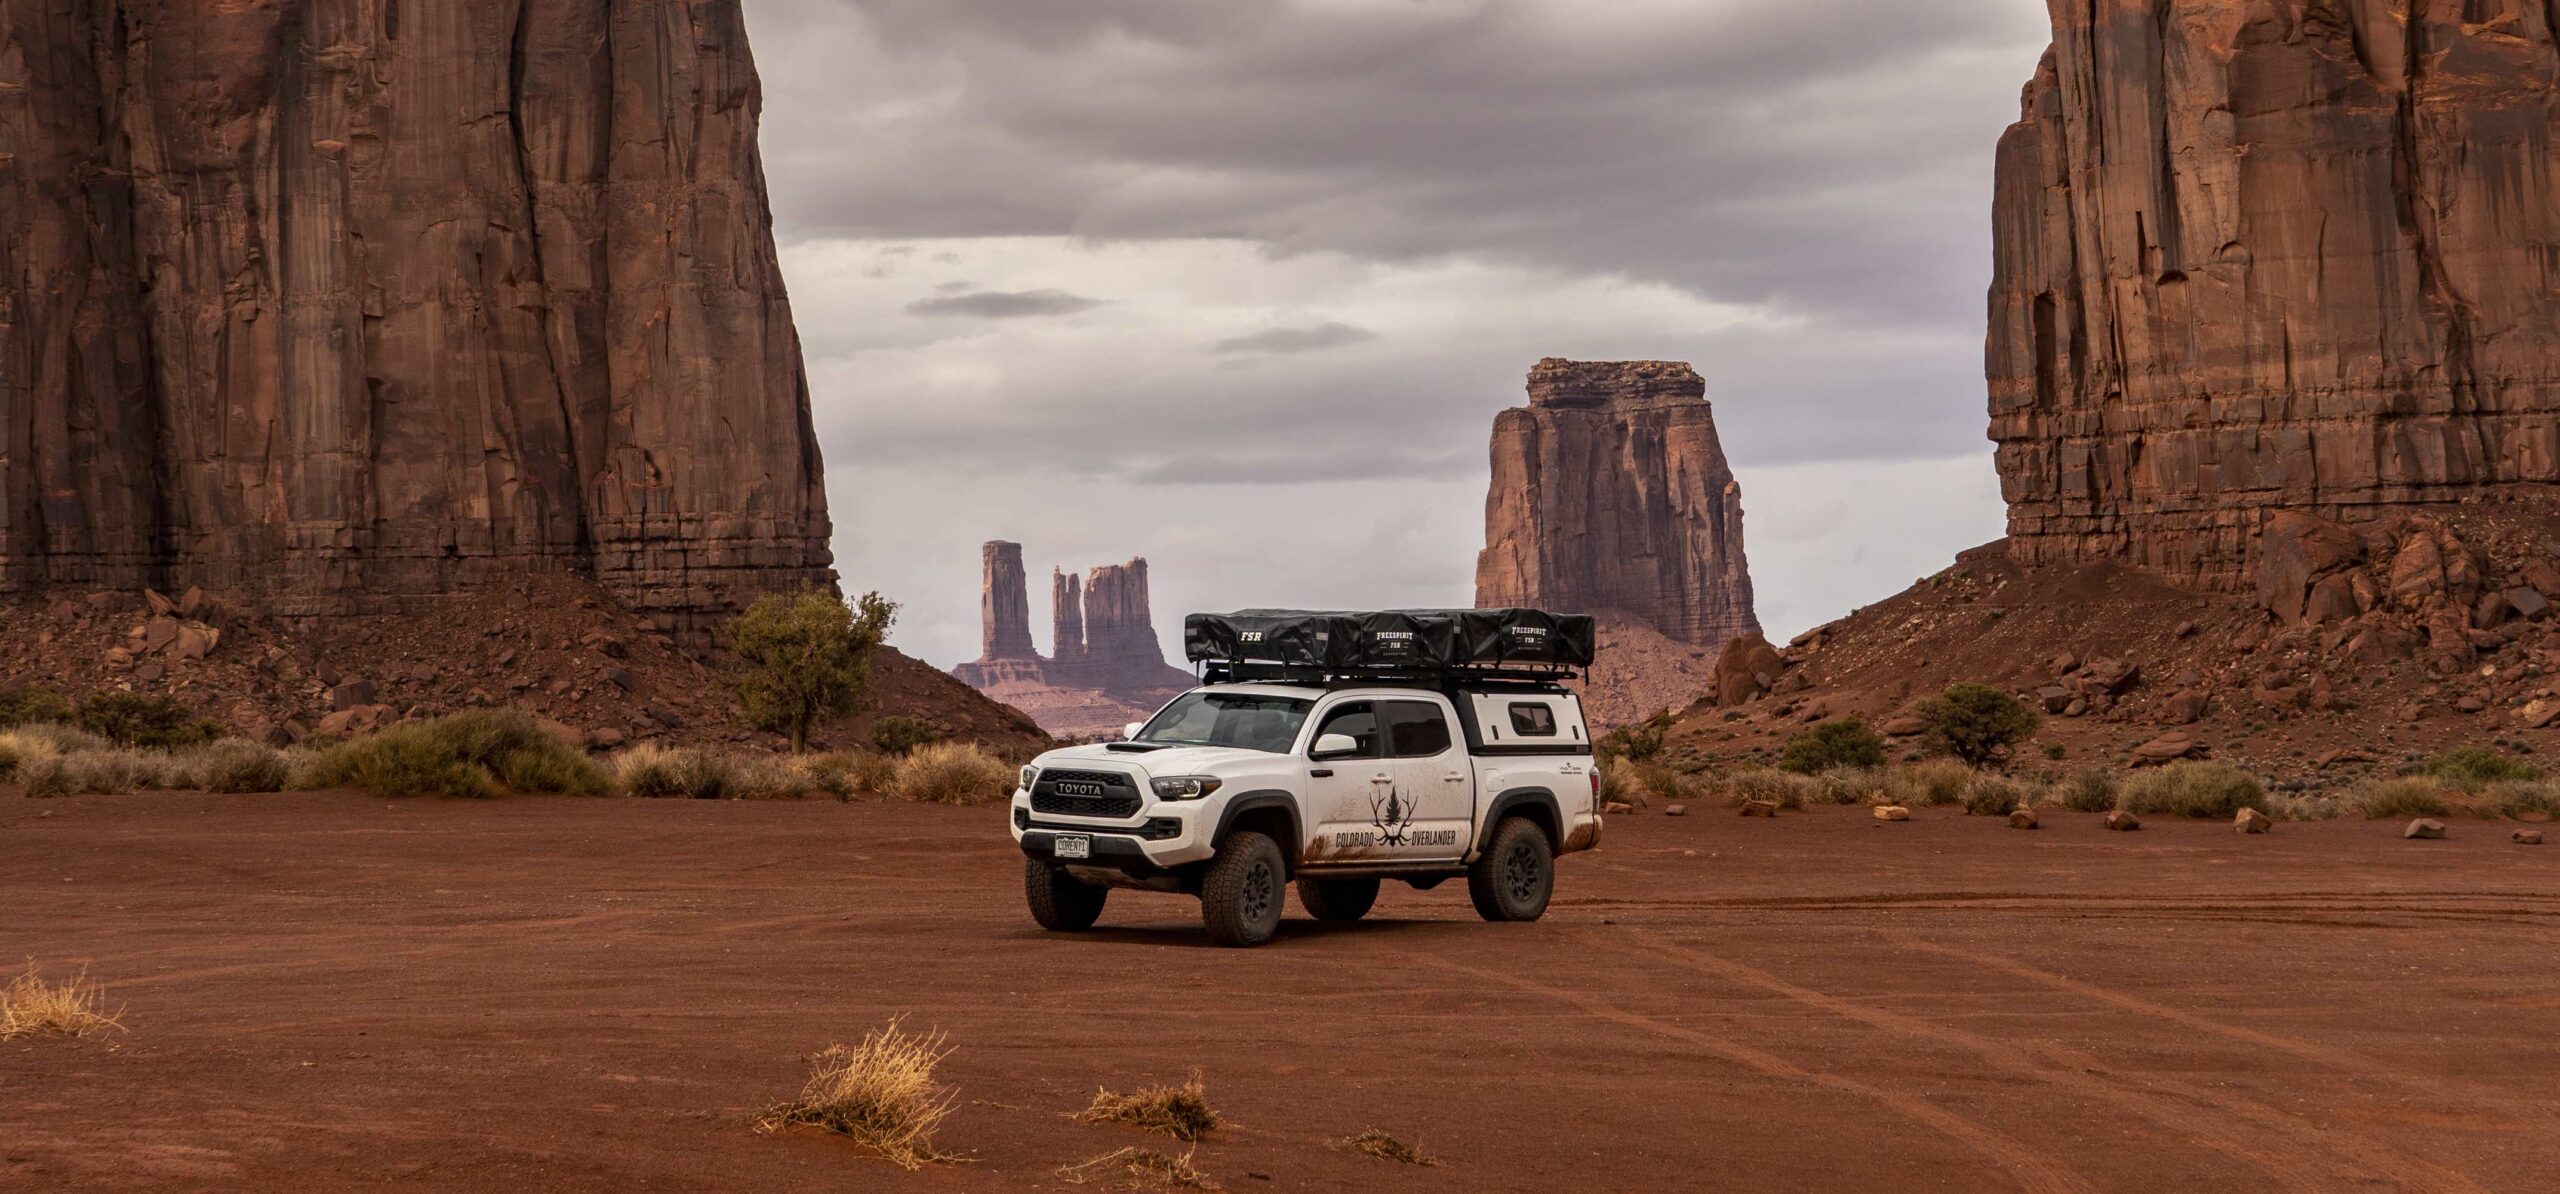 A photo of the ultimate overlanding adventure with our rugged white overland truck set against a dramatic red desert backdrop. Towering rock formations frame the scene, creating a striking contrast against the gray sky adorned with gentle clouds. This purpose-built overland vehicle, complete with roof-top tents, stands ready to traverse the vast and awe-inspiring desert terrains.